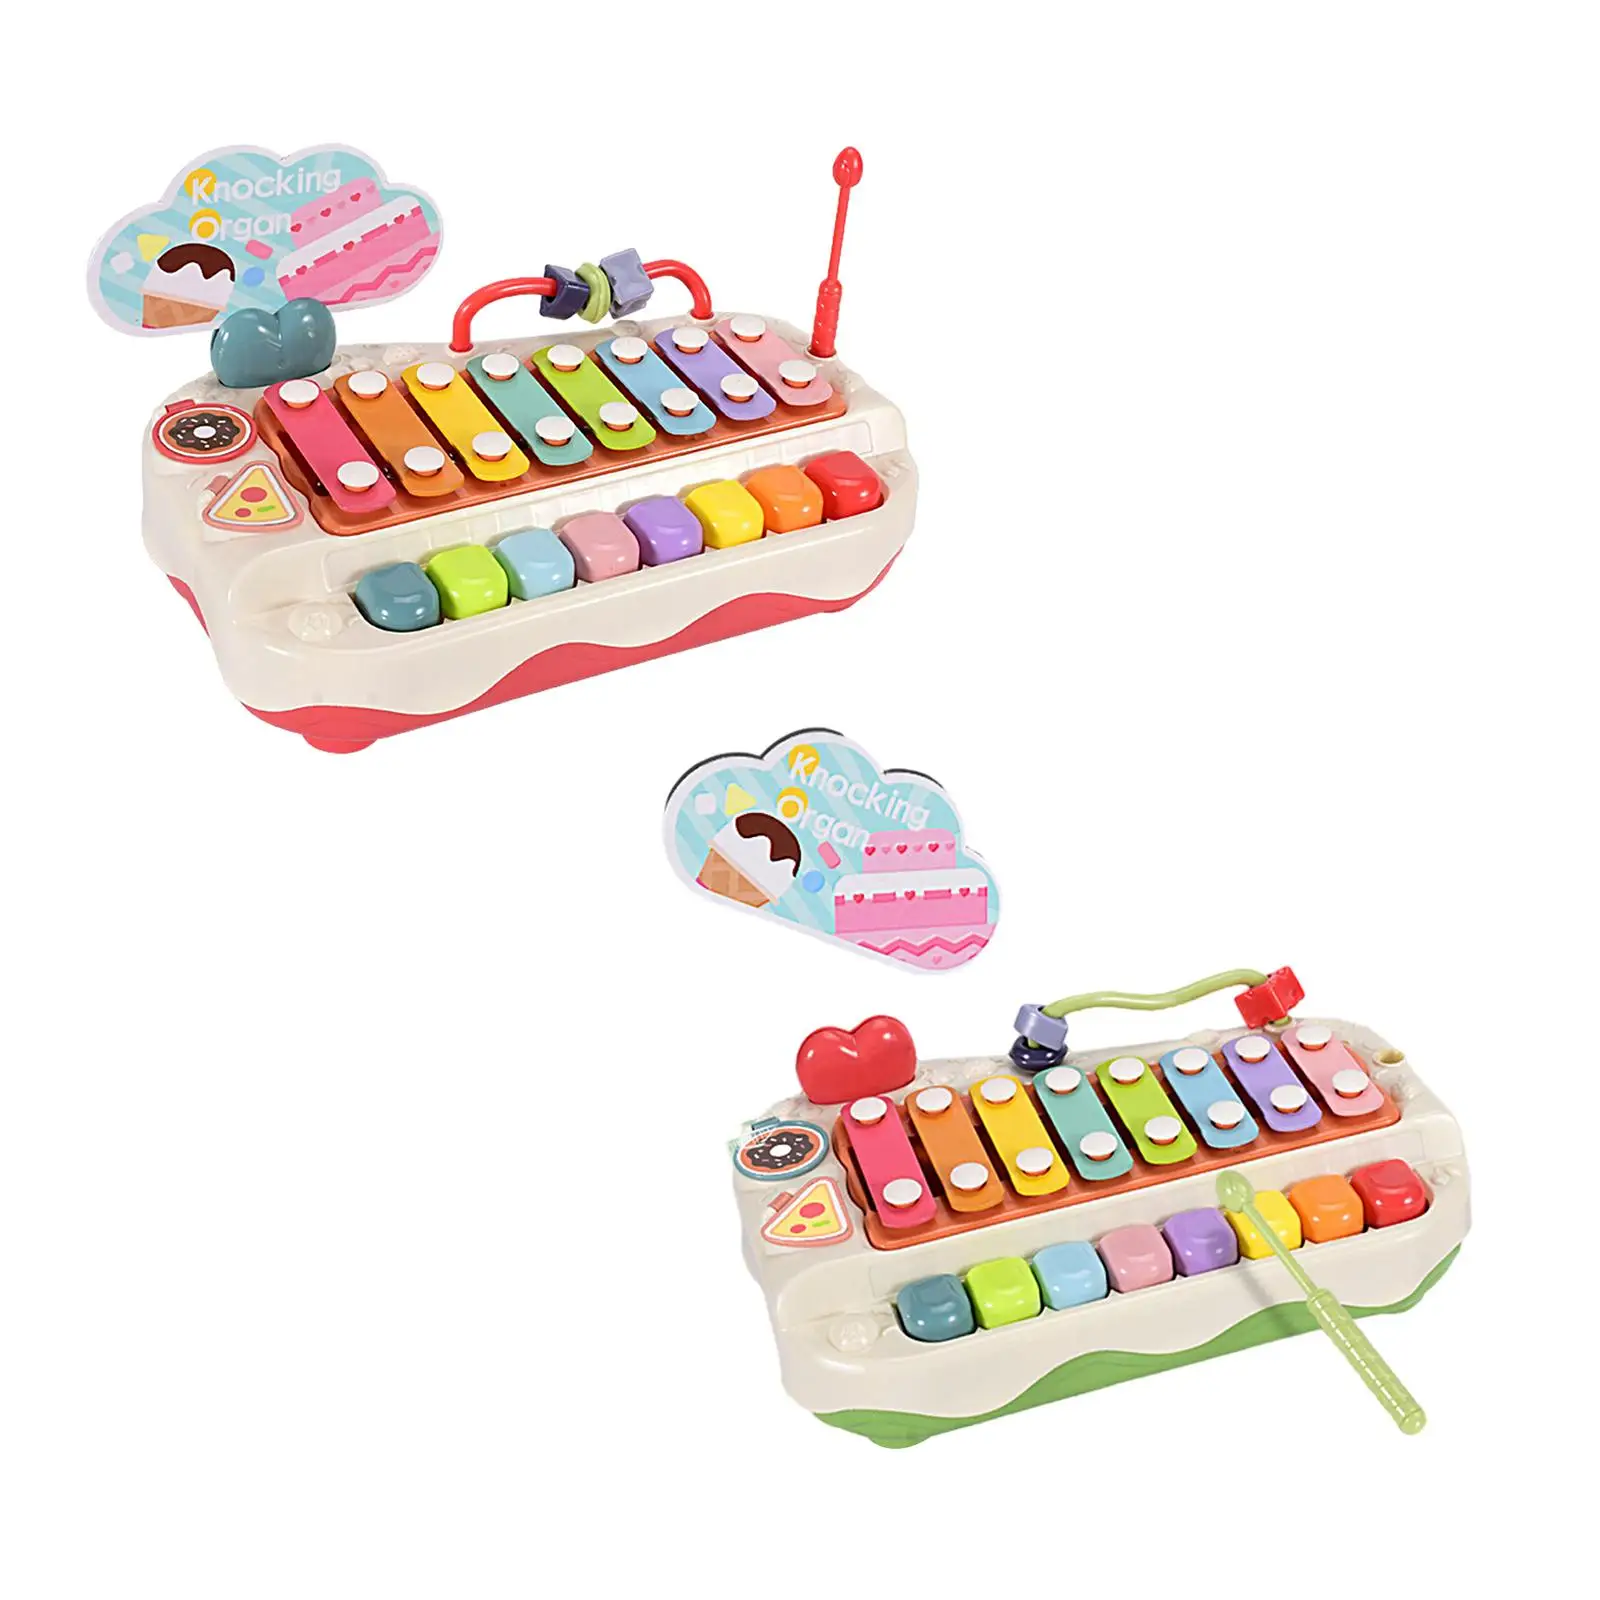 Baby Musical Toy Colorful Motor Skills Educational Hand Knocking Piano for Baby 1 2 3 Years Old Kids Boy Girls Holiday Gifts